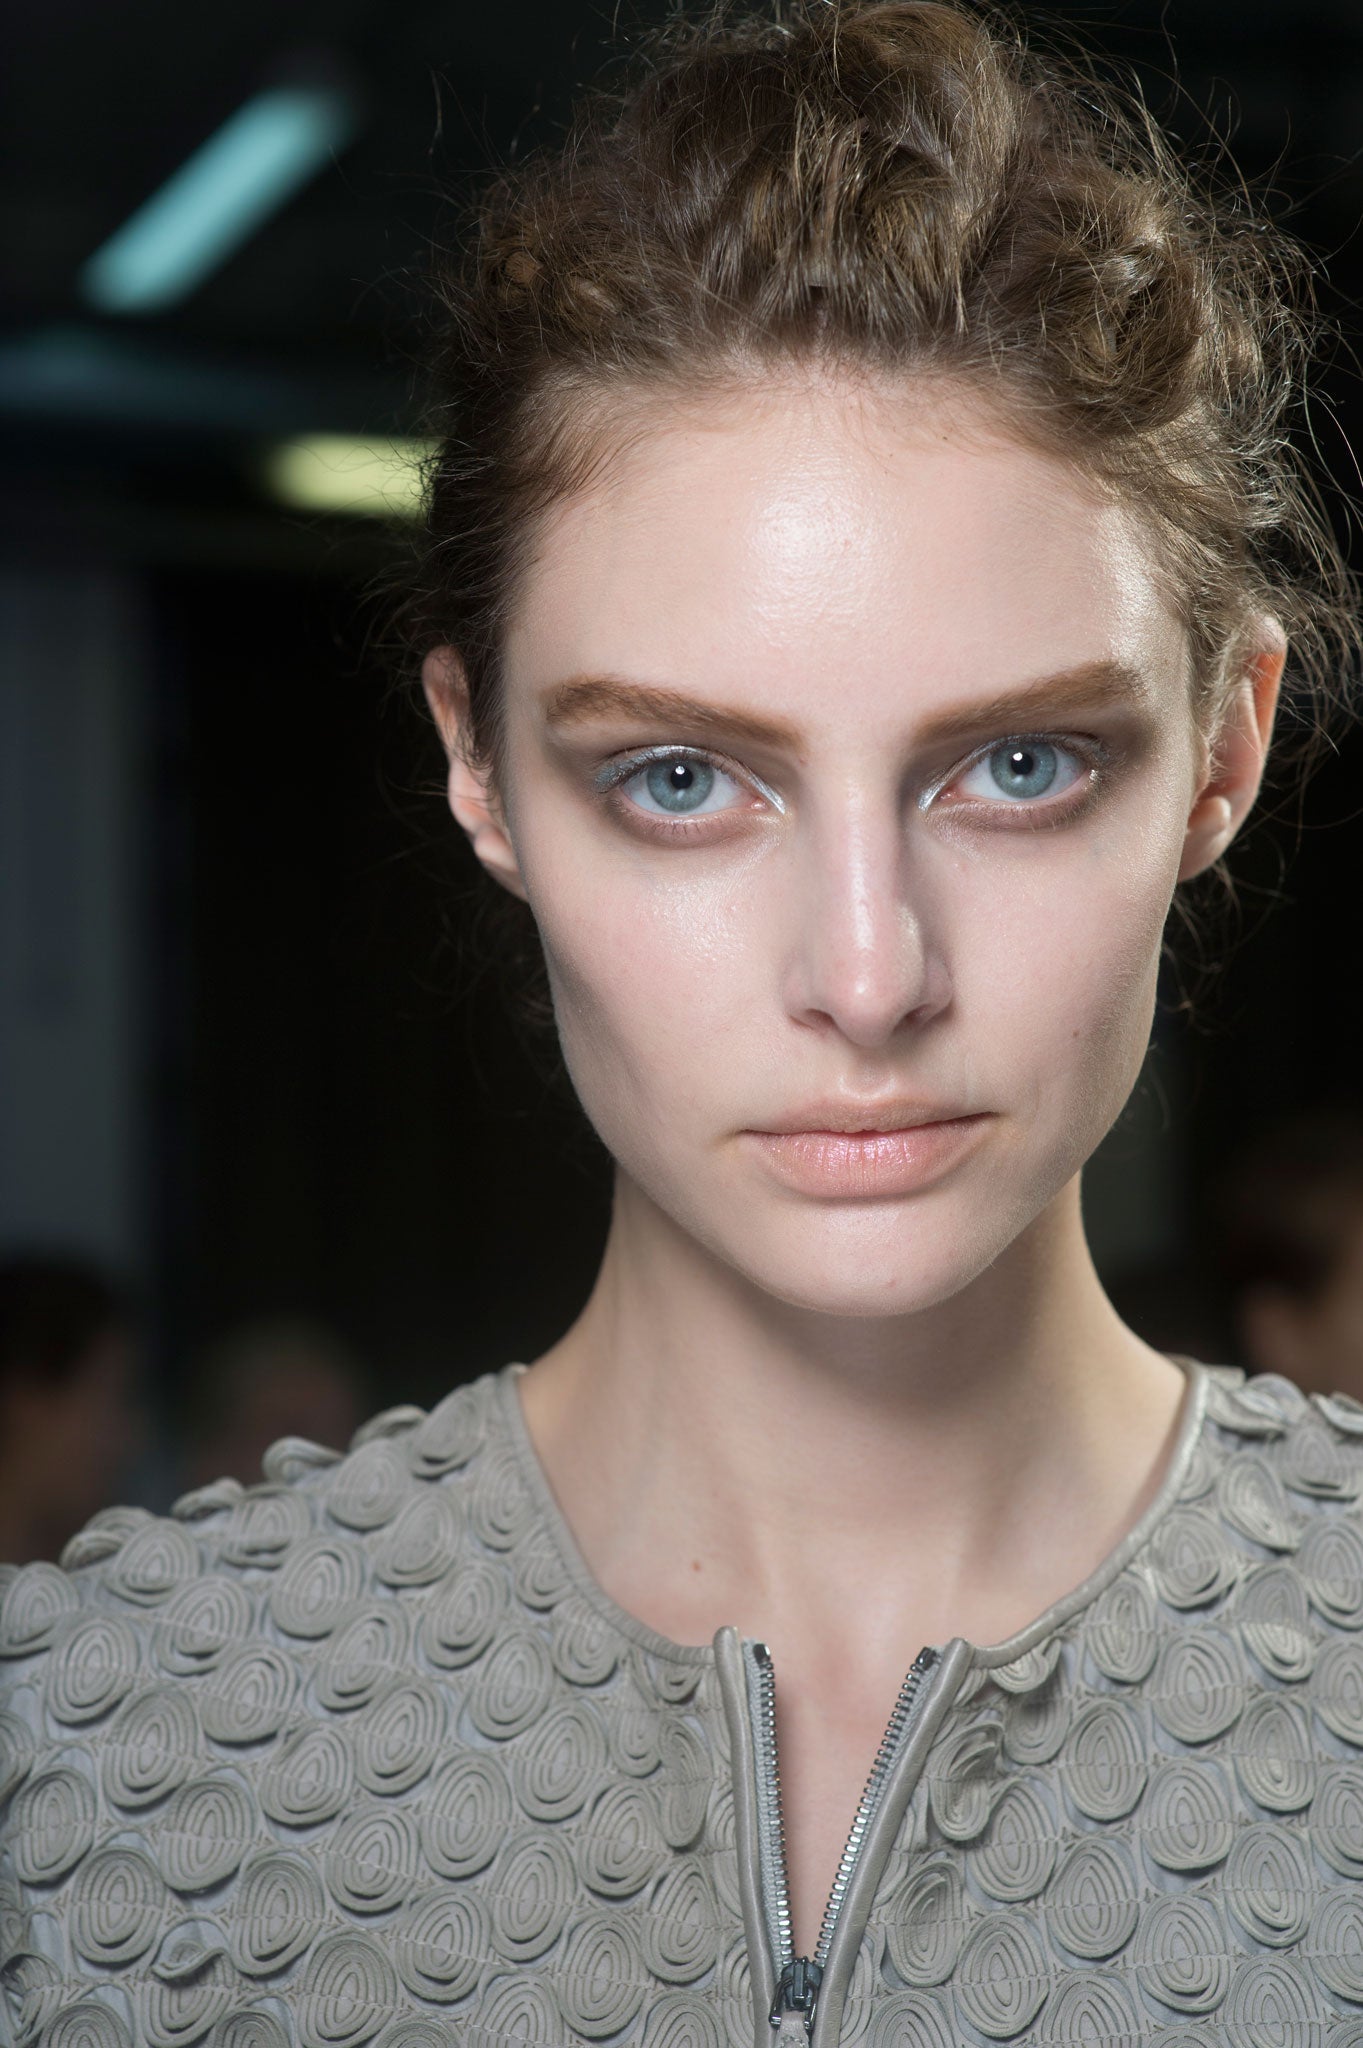 Diary of a make-up artist: Backstage in Milan at Giorgio Armani's ...